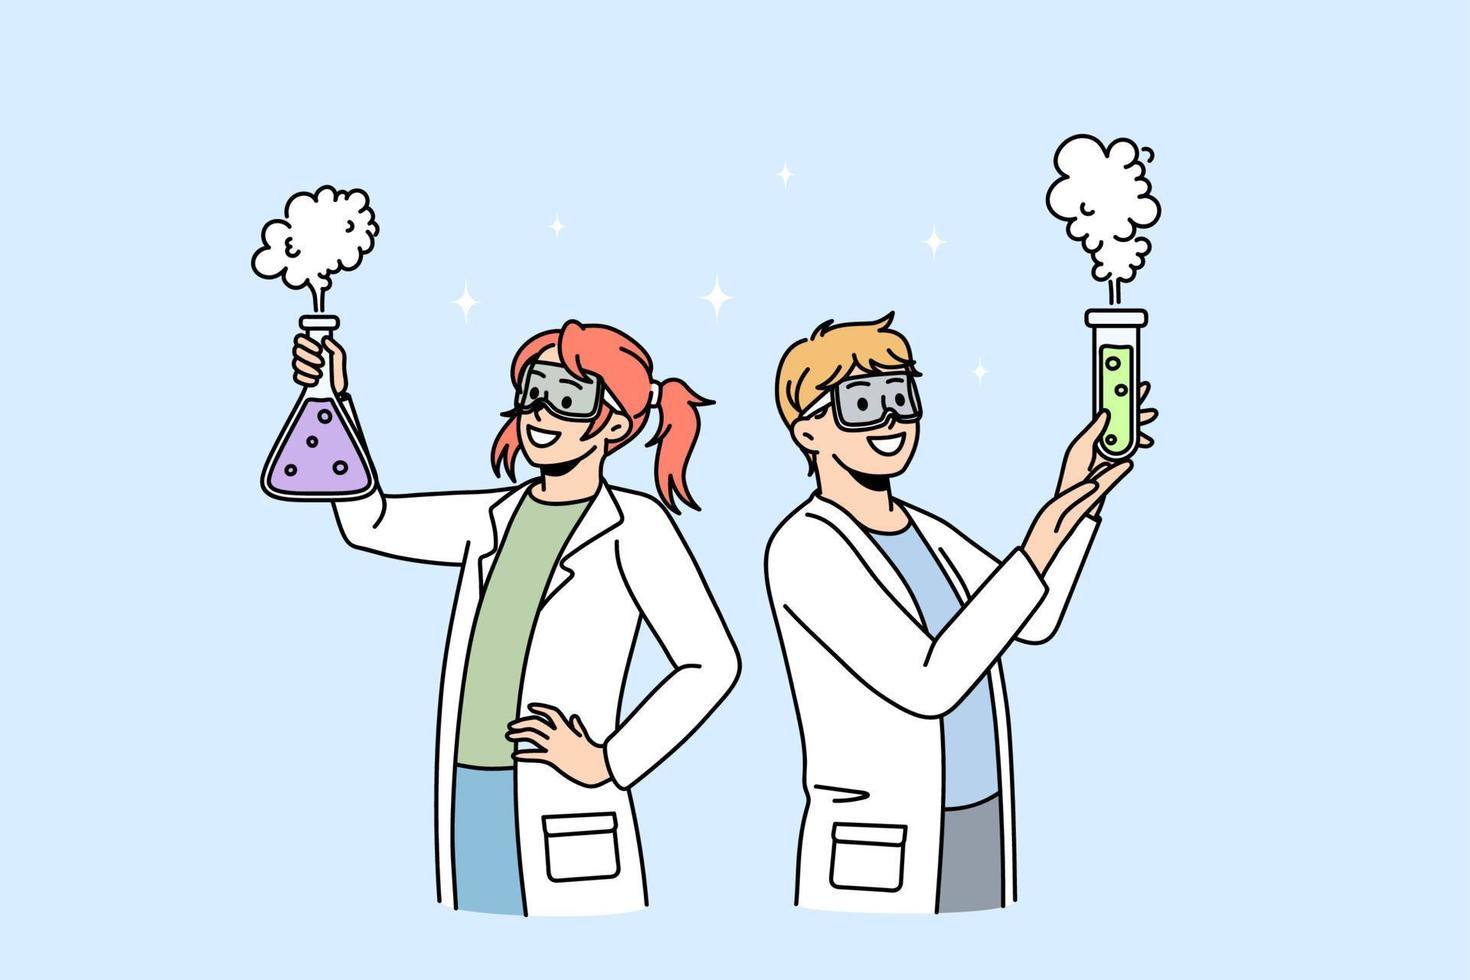 Happy kids in medical uniform do science experiments at chemistry class at school. Smiling children have fun experiment in laboratory dream to be scientists. Education concept. Vector illustration.